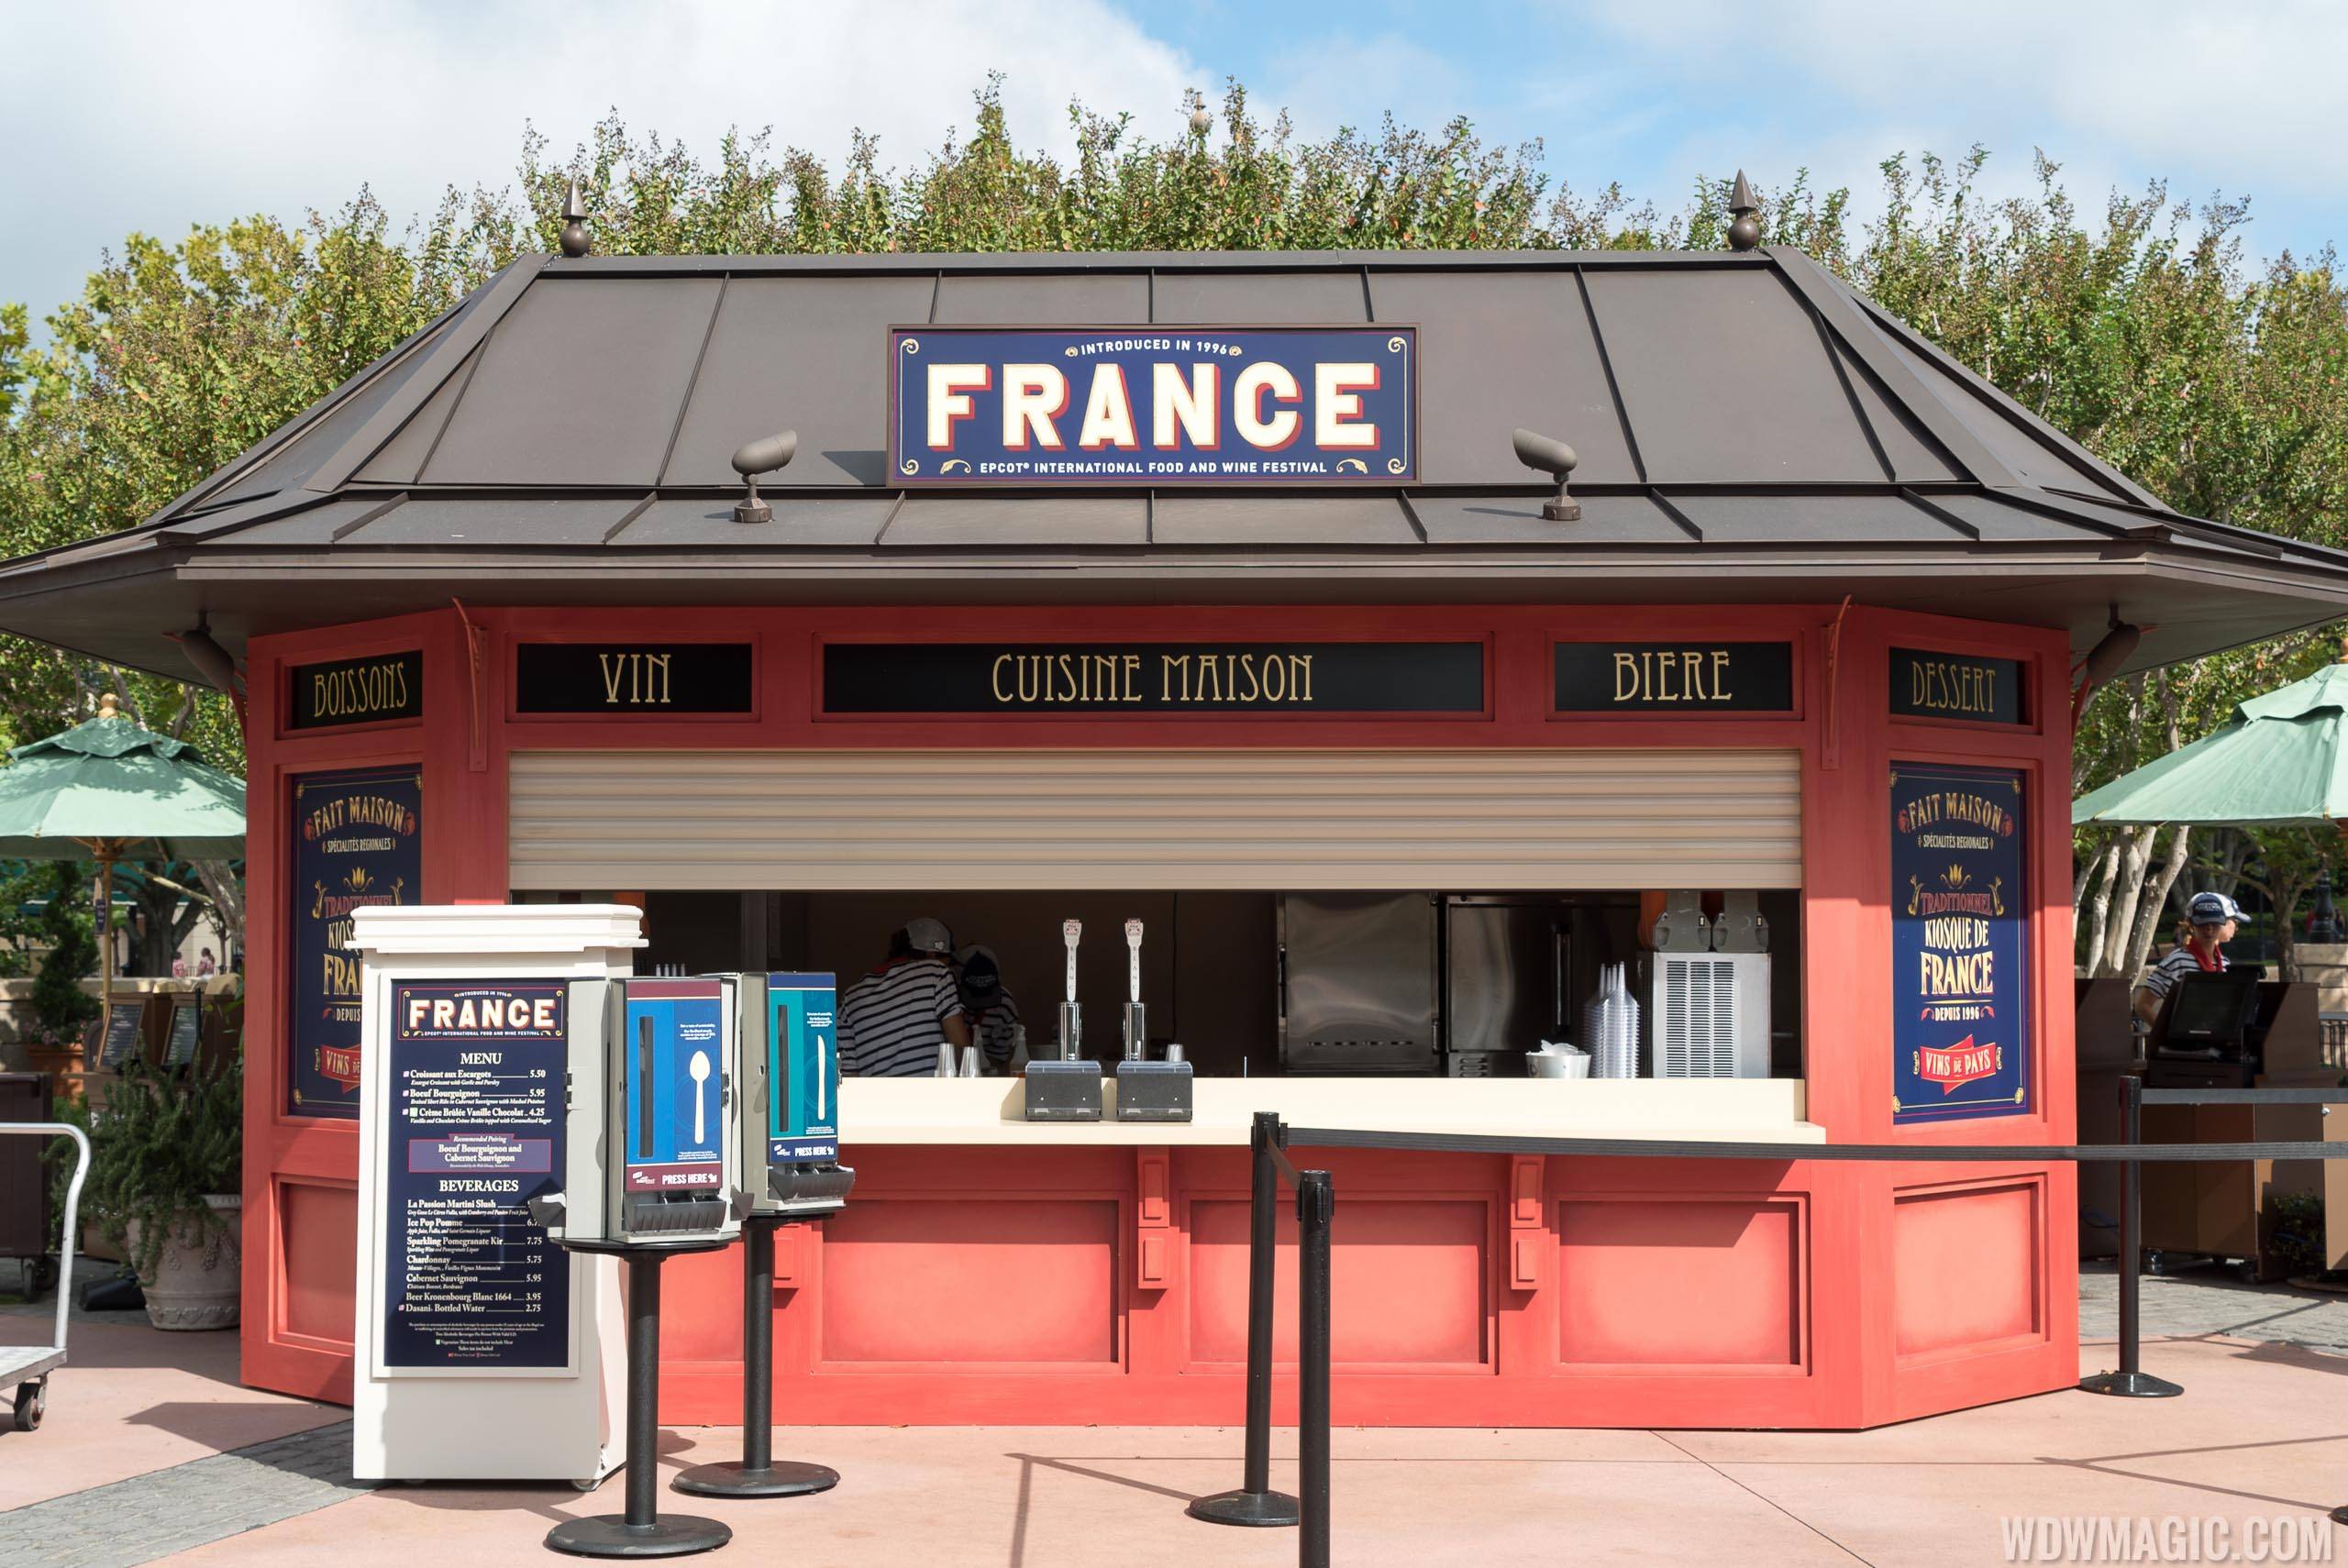 2015 Epcot Food and Wine Festival Marketplace kiosk - France